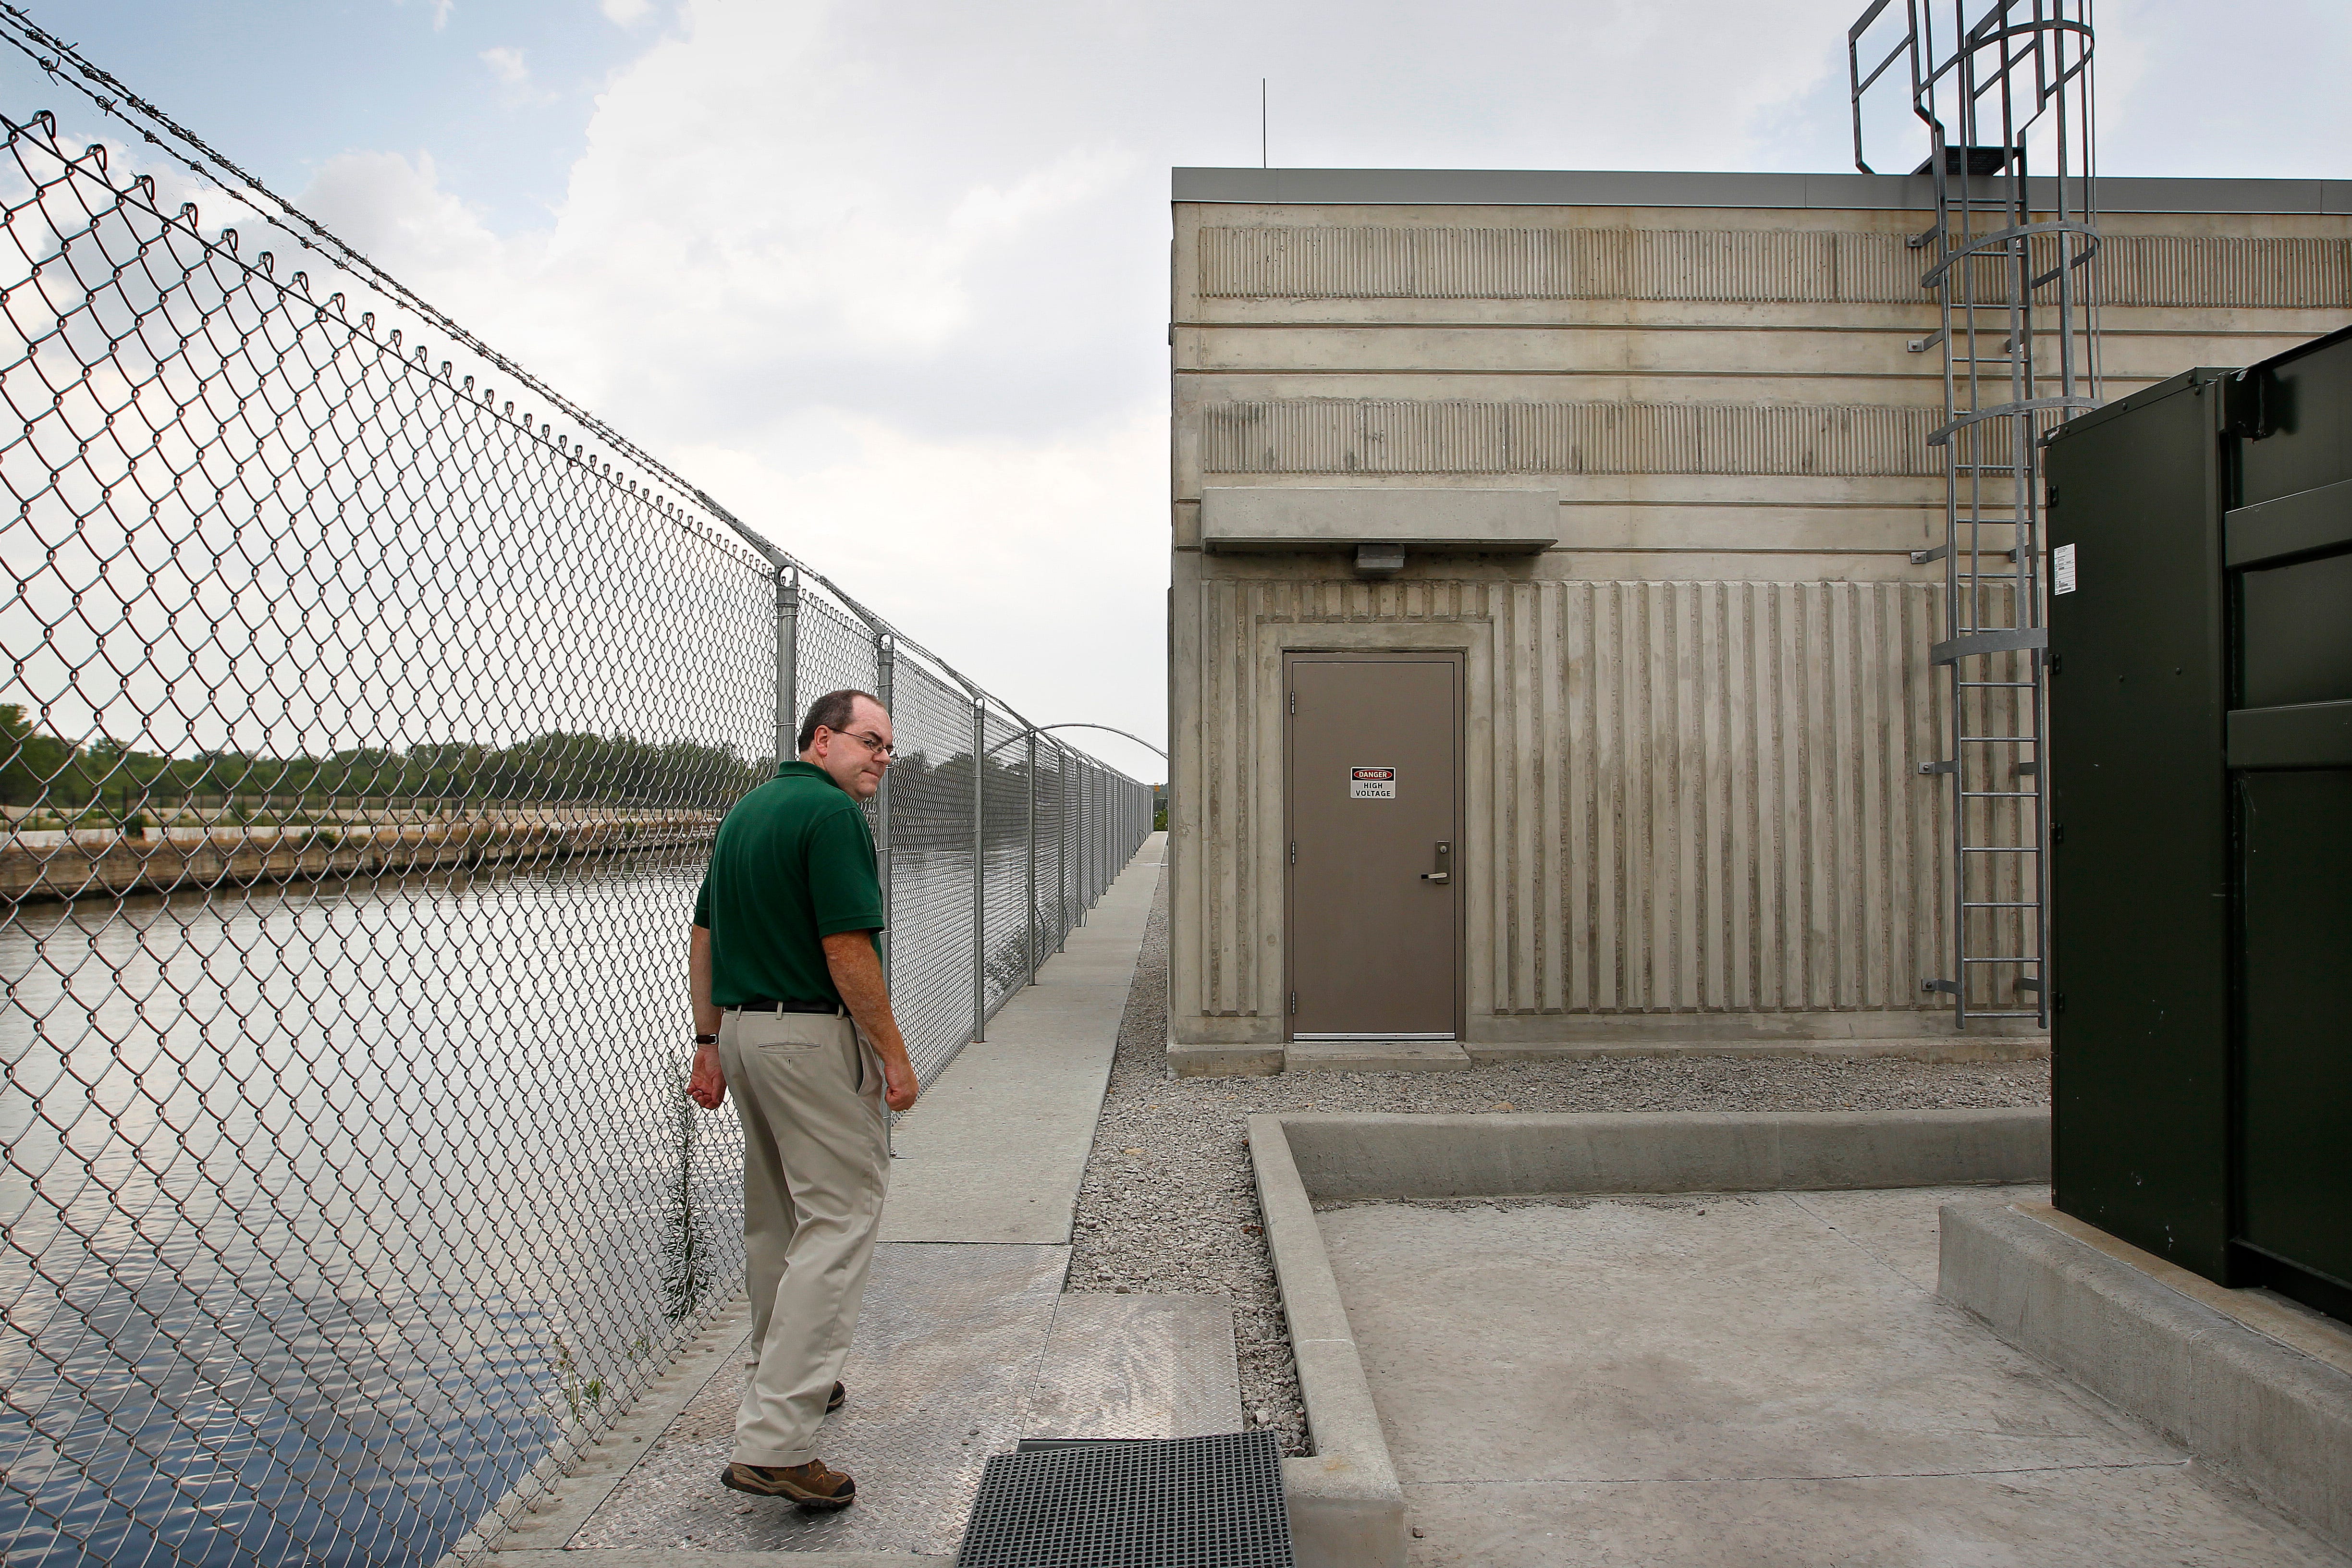 CARP_BARRIER. NWS, PORTER, 4. - Charles Shea. project manager, walks along the fenced off area of the Army Corps of Engineers' Electric Dispersal Barriers' monitoring station on the Chicago Sanitary and Ship Canal in Lockport, Illinois near Chicago. The barriers are designed to prevent inter-basin transfer of fish between the Mississippi River and the Great Lakes basins via the canal. July 19, 2012. GARY PORTER/GPORTER@JOURNALSENTINEL.COM